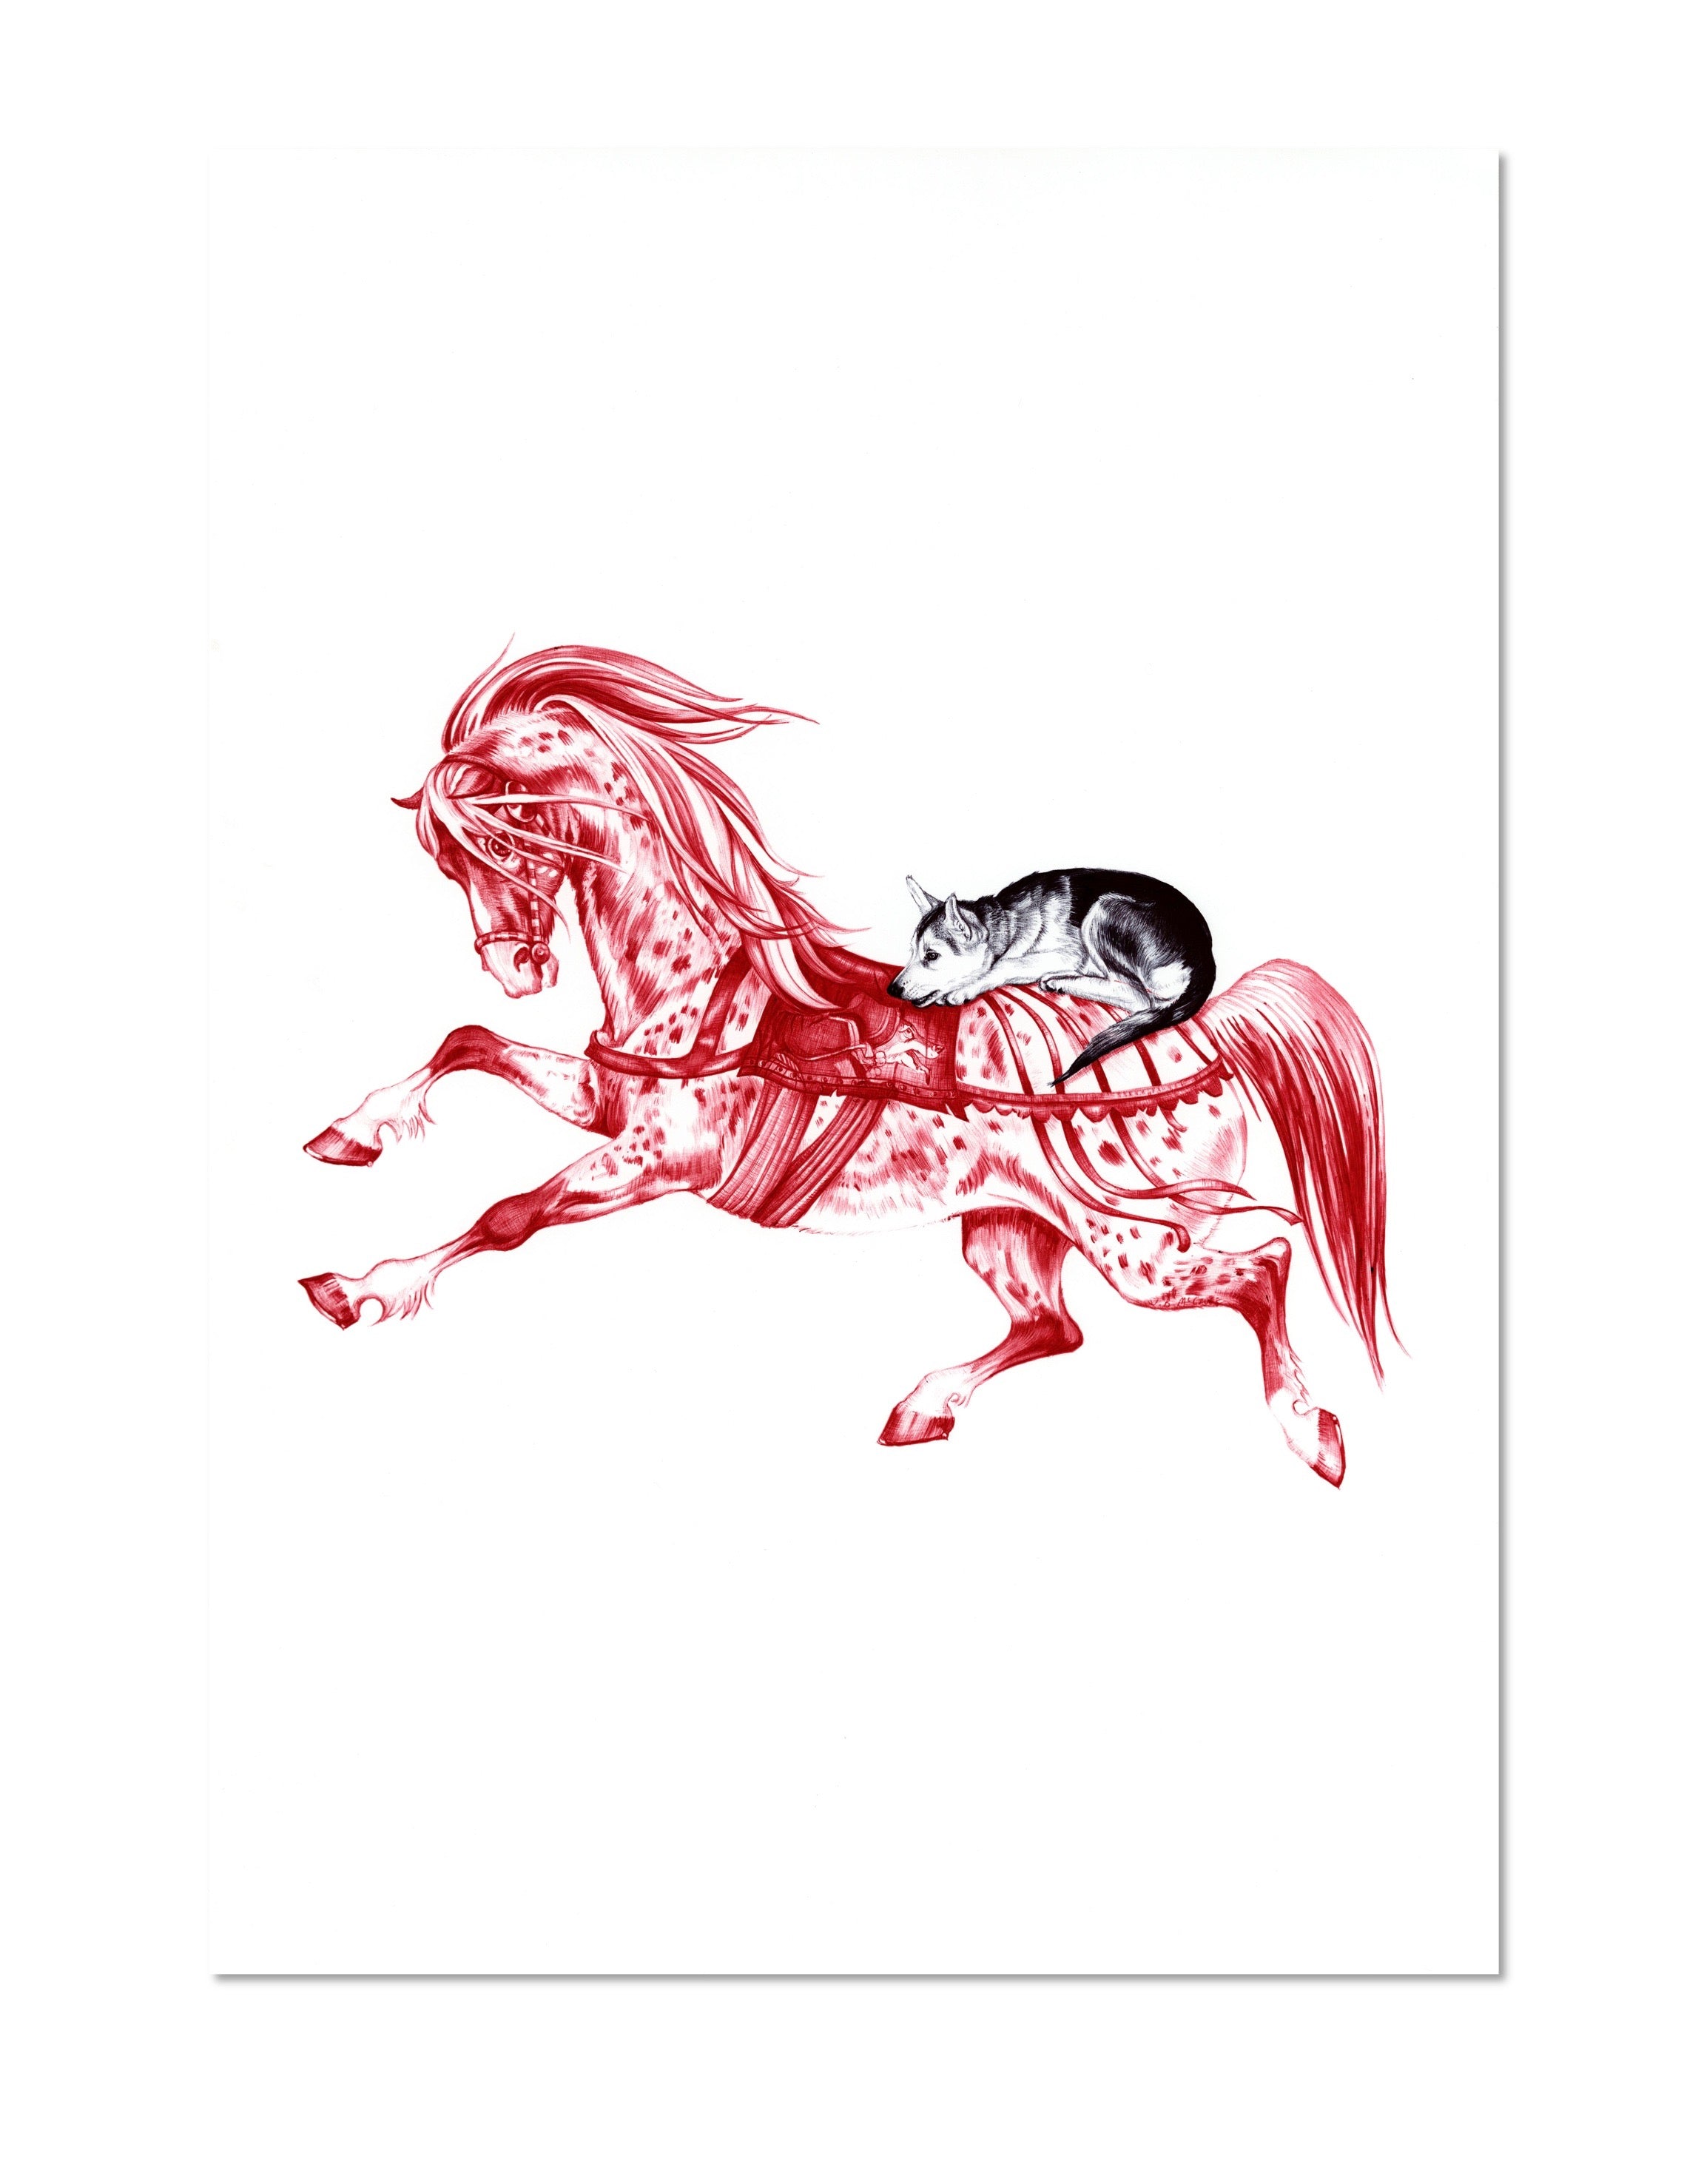 The Horse and the Wolf Cub Print